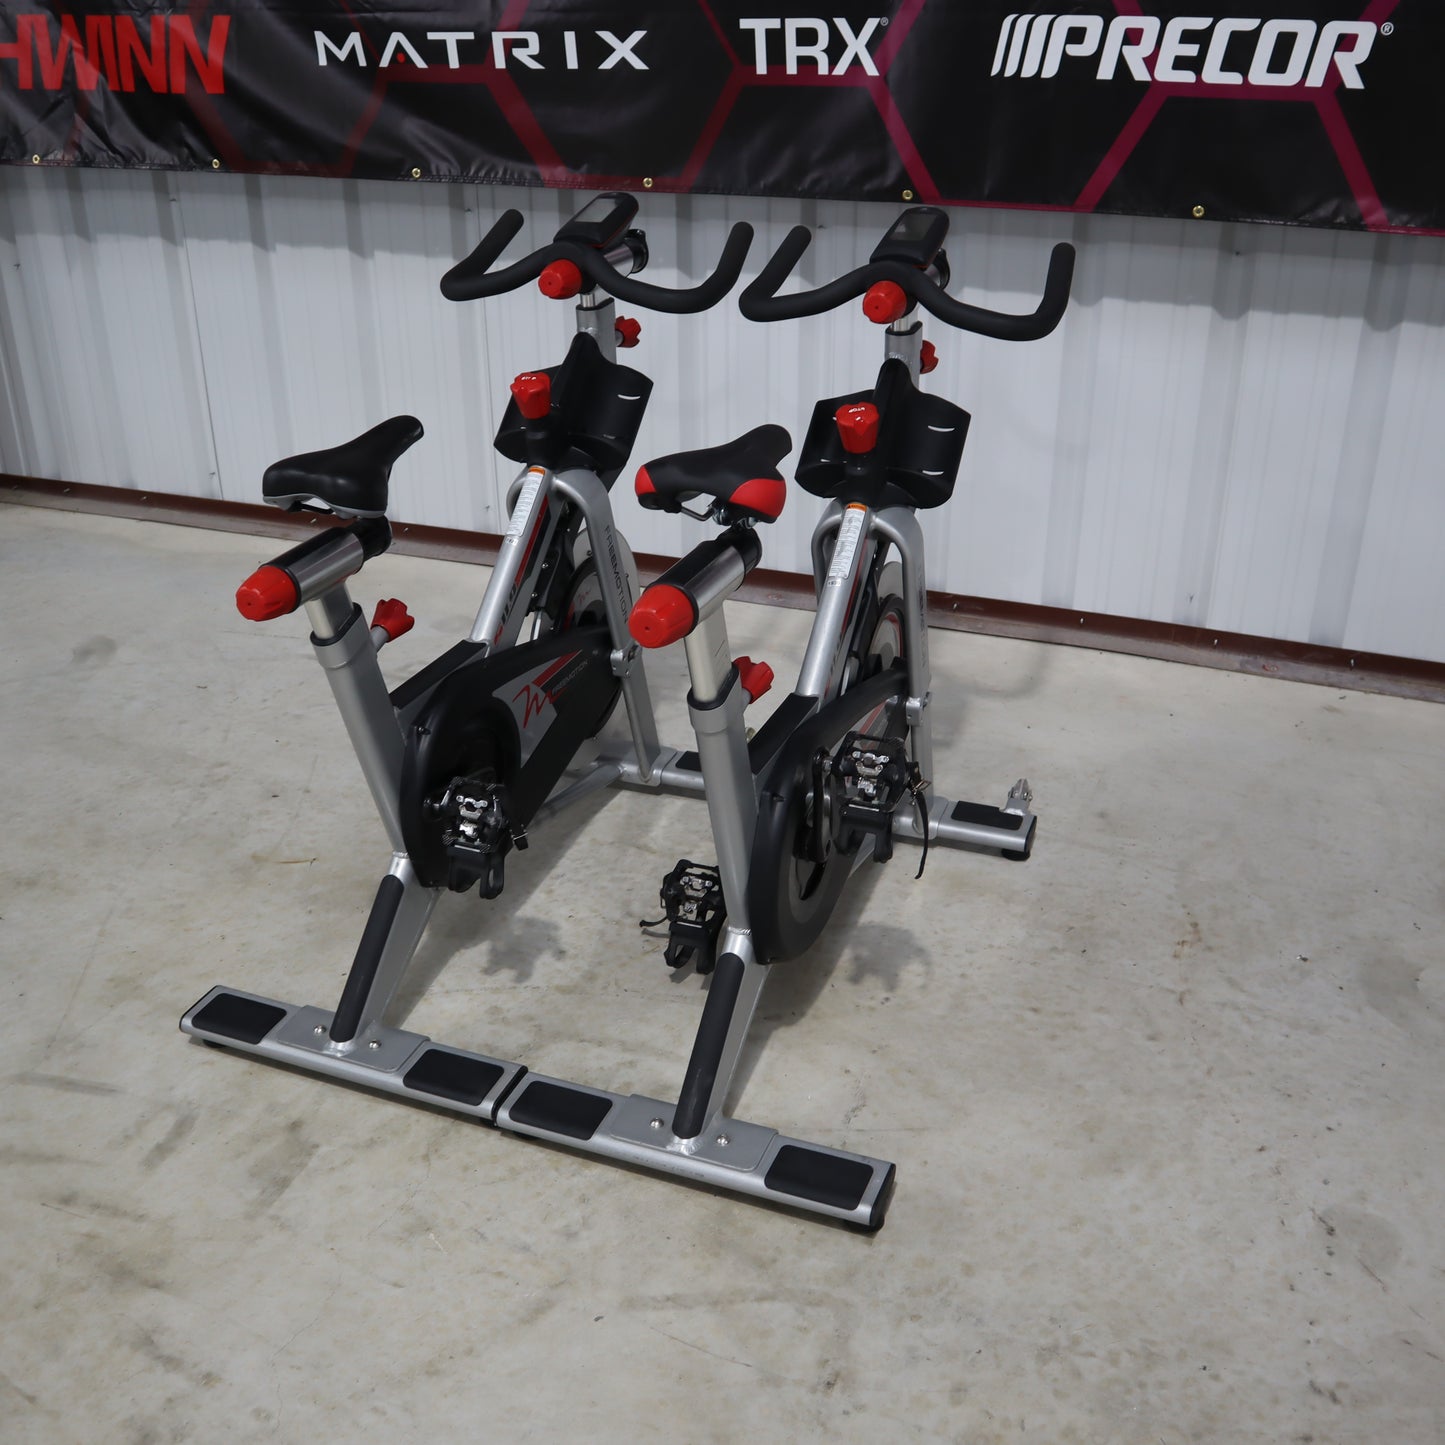 Freemotion S11.9 Indoor Cycle Package *2 Units* (Used)